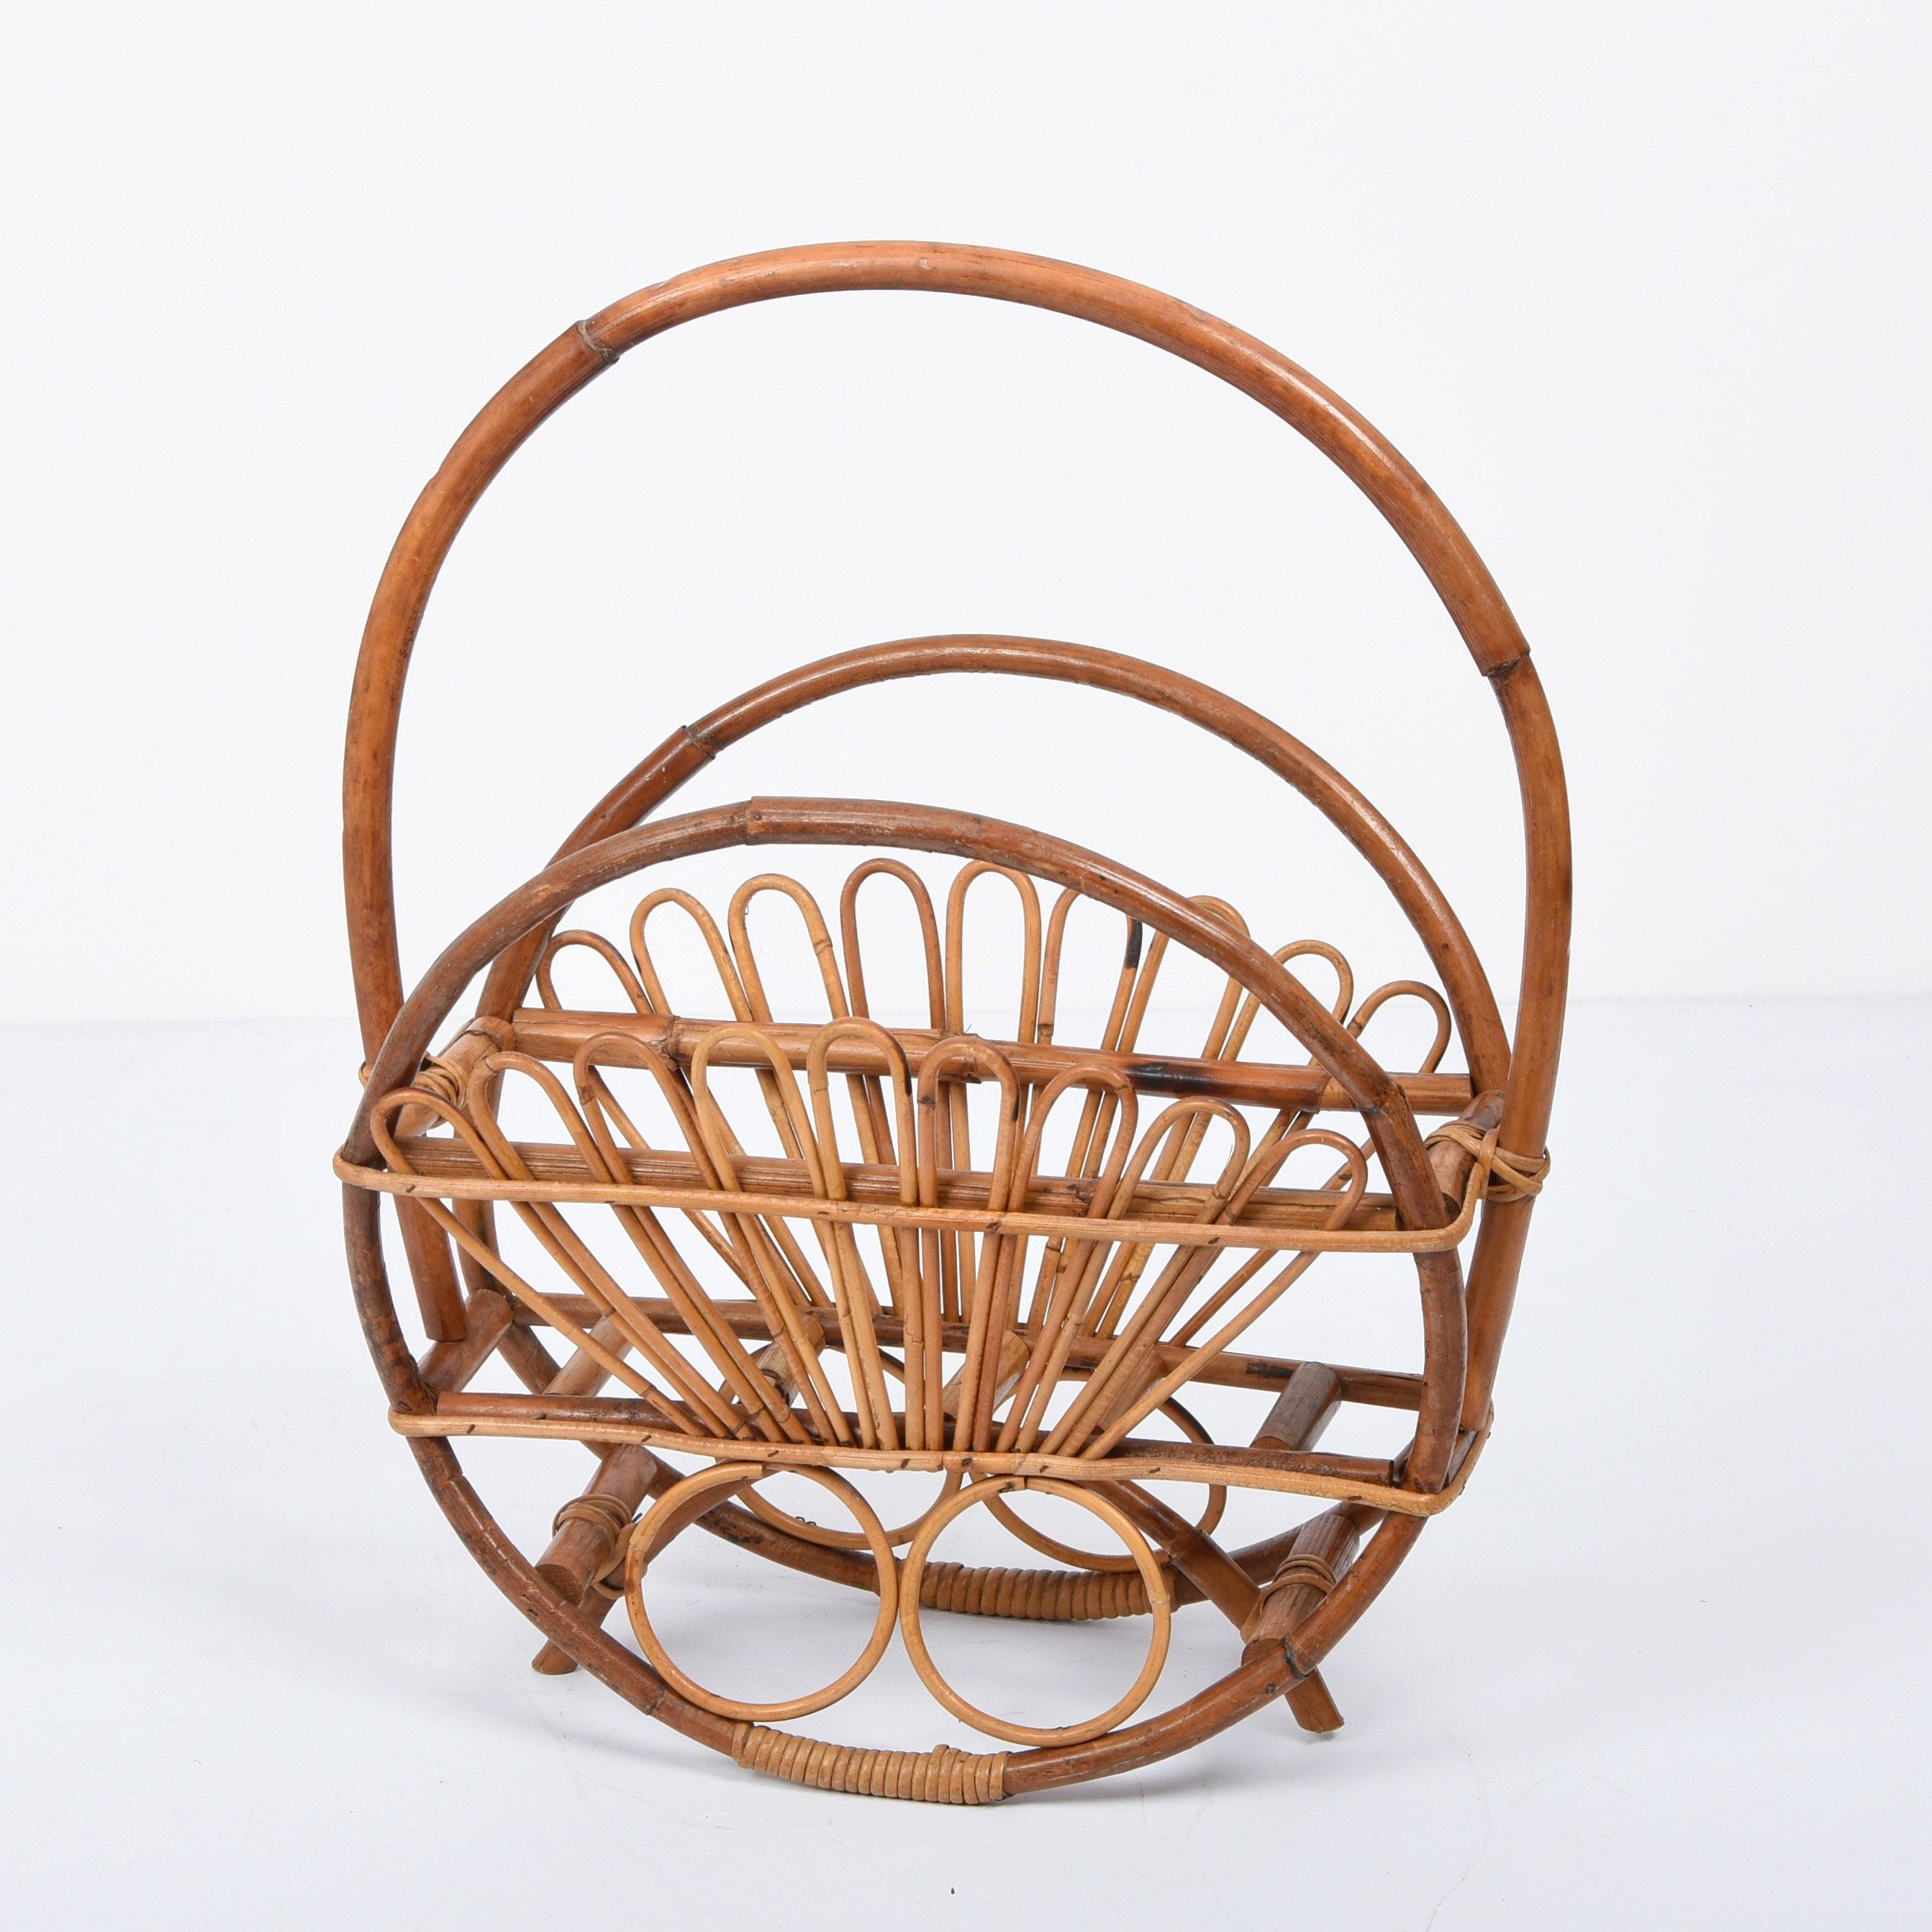 Wonderful mid-century French riviera bamboo and rattan magazine rack. This marvellous piece was designed in Italy during the 1960s

This magnificent piece presents two different shades of brown, a darker one for the external structure and a